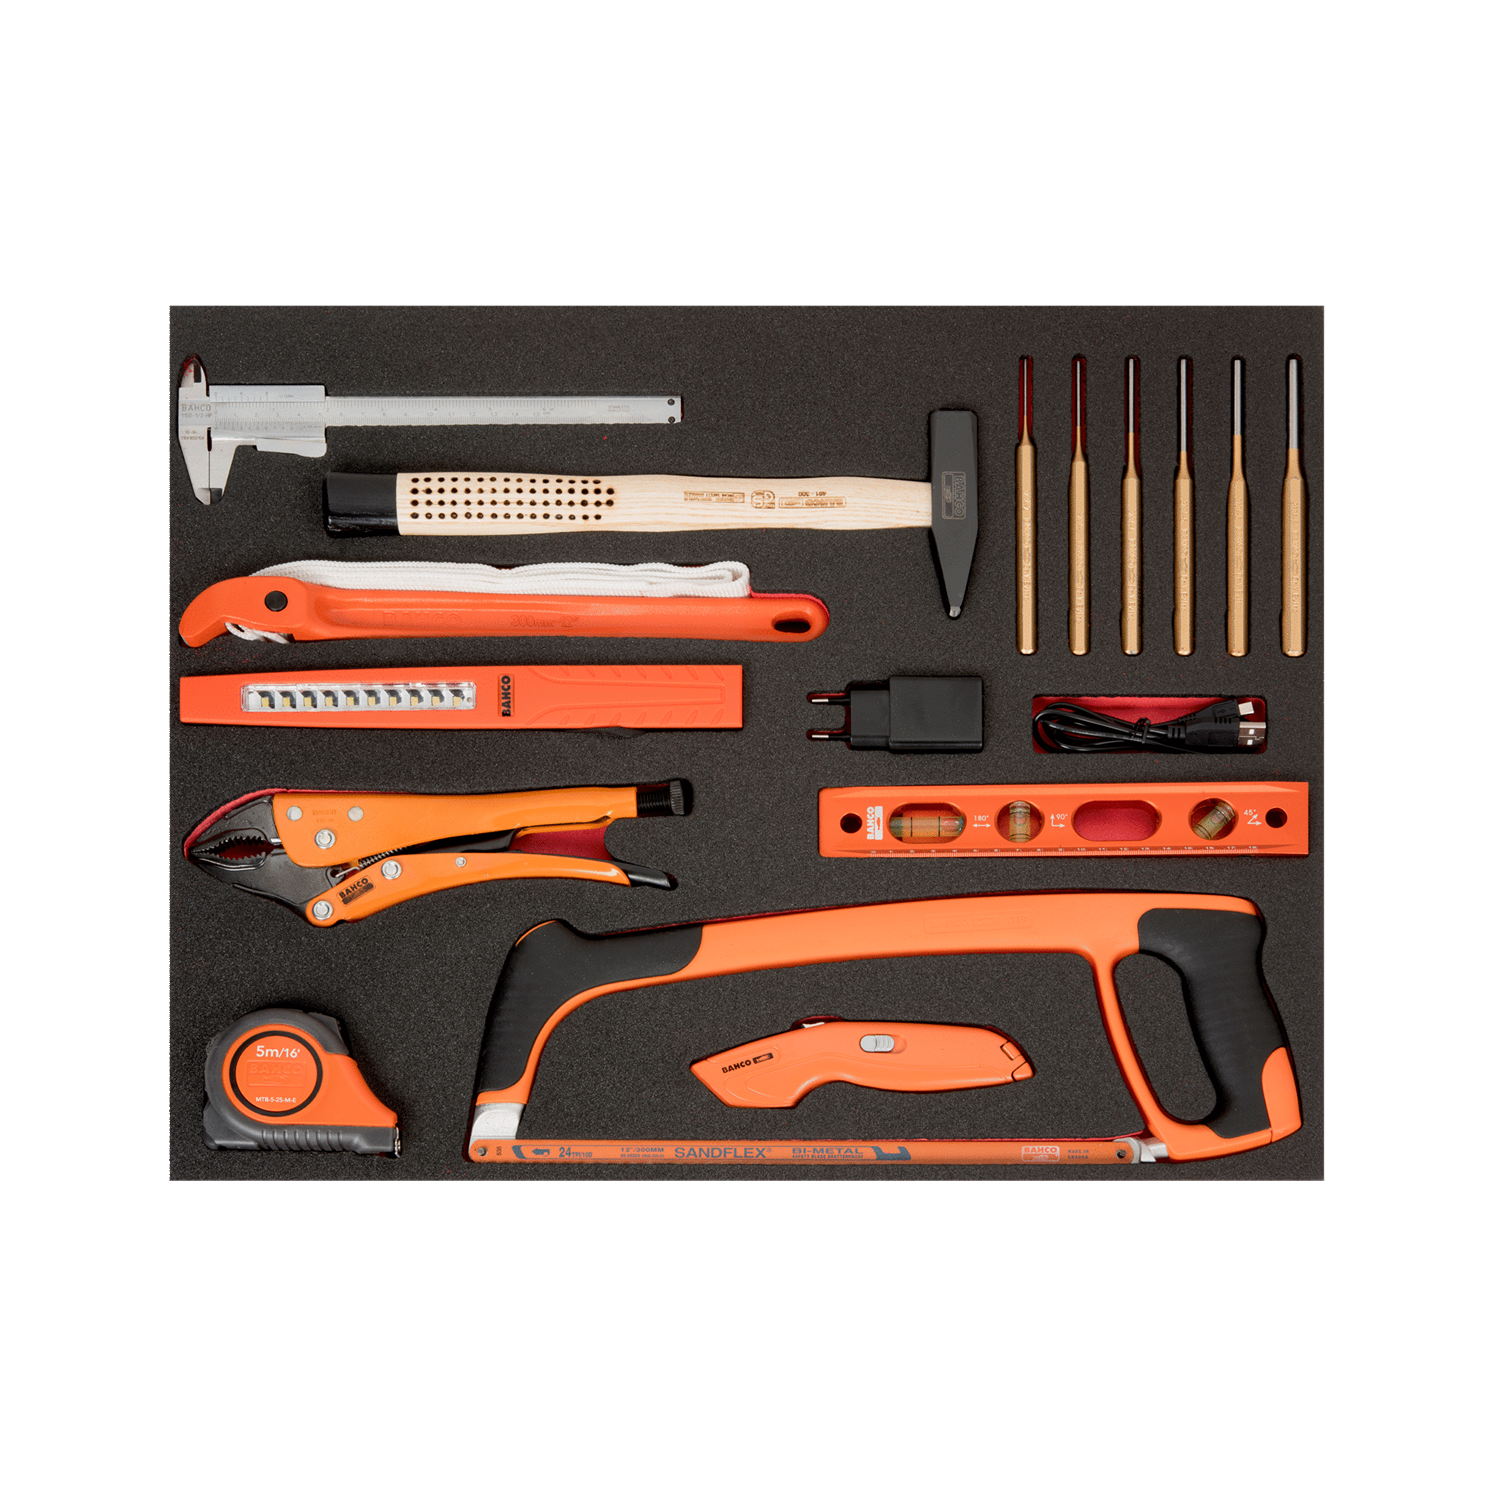 BAHCO FF1A119 Fit&Go 3/3 Foam Inlay Striking and Cutting Tool set - Premium Striking and Cutting Tool Set from BAHCO - Shop now at Yew Aik.